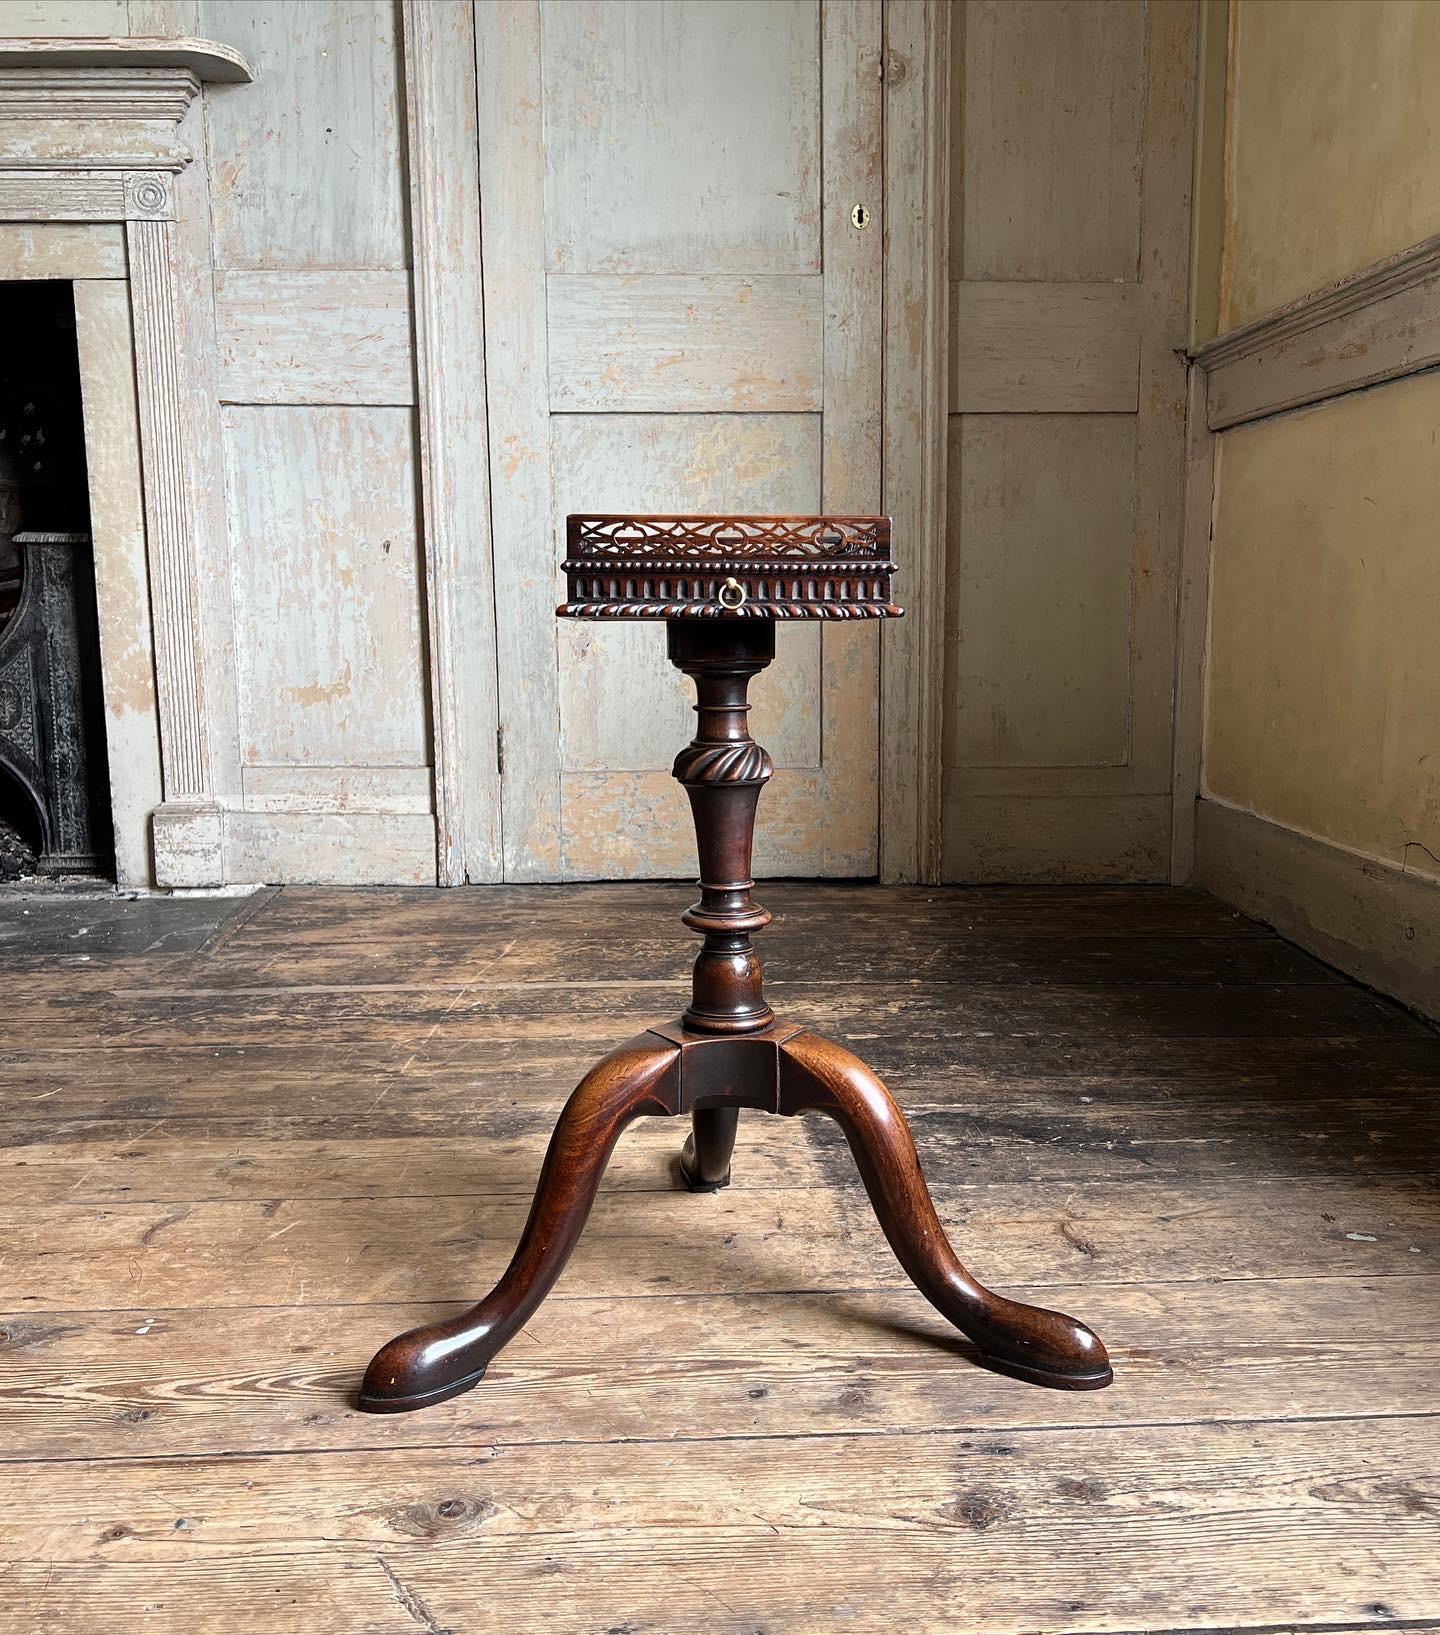 An exceptional George III mahogany Chippendale period kettle stand, c.1760. In original condition and of fantastic patina & colour.

Measures - 57.5cm H (to gallery top) x 22.5cm W x 23cm D.